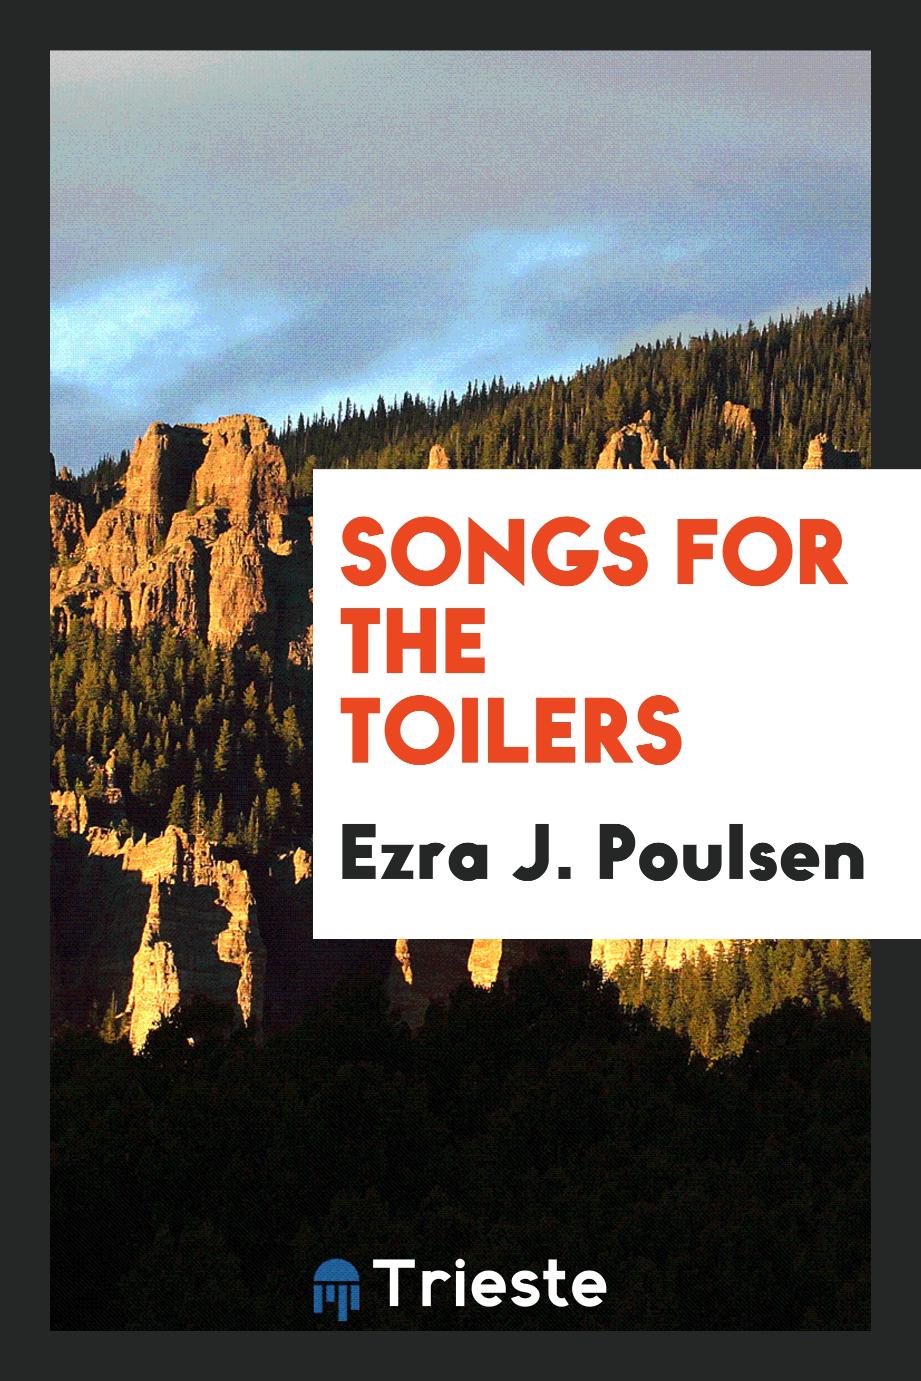 Songs for the toilers